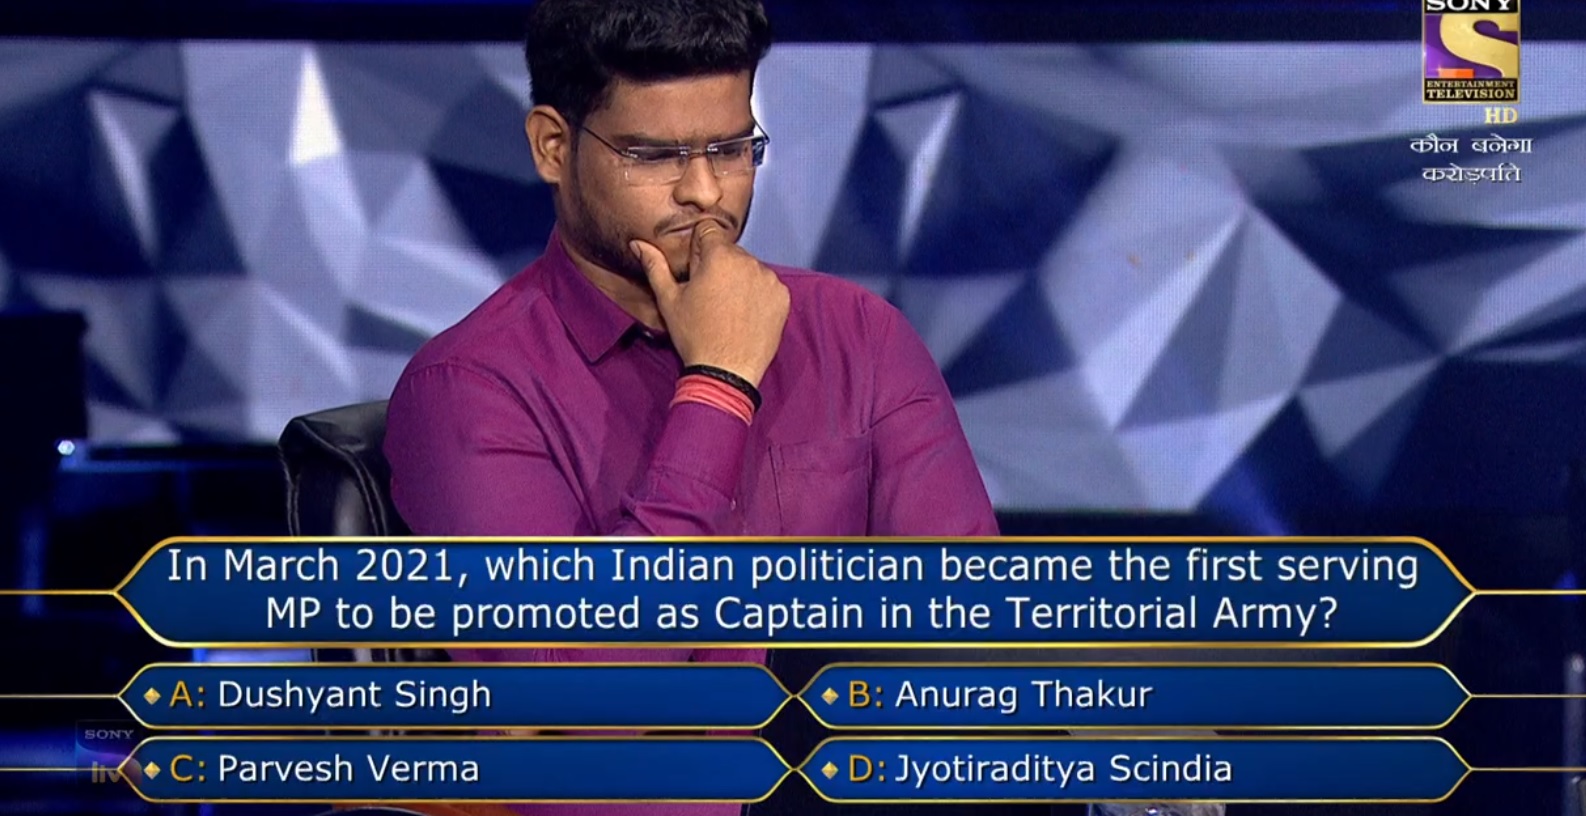 Ques : In March 2021, which Indian politician became the first serving MP to be promoted as Captain in the Territorial Army?